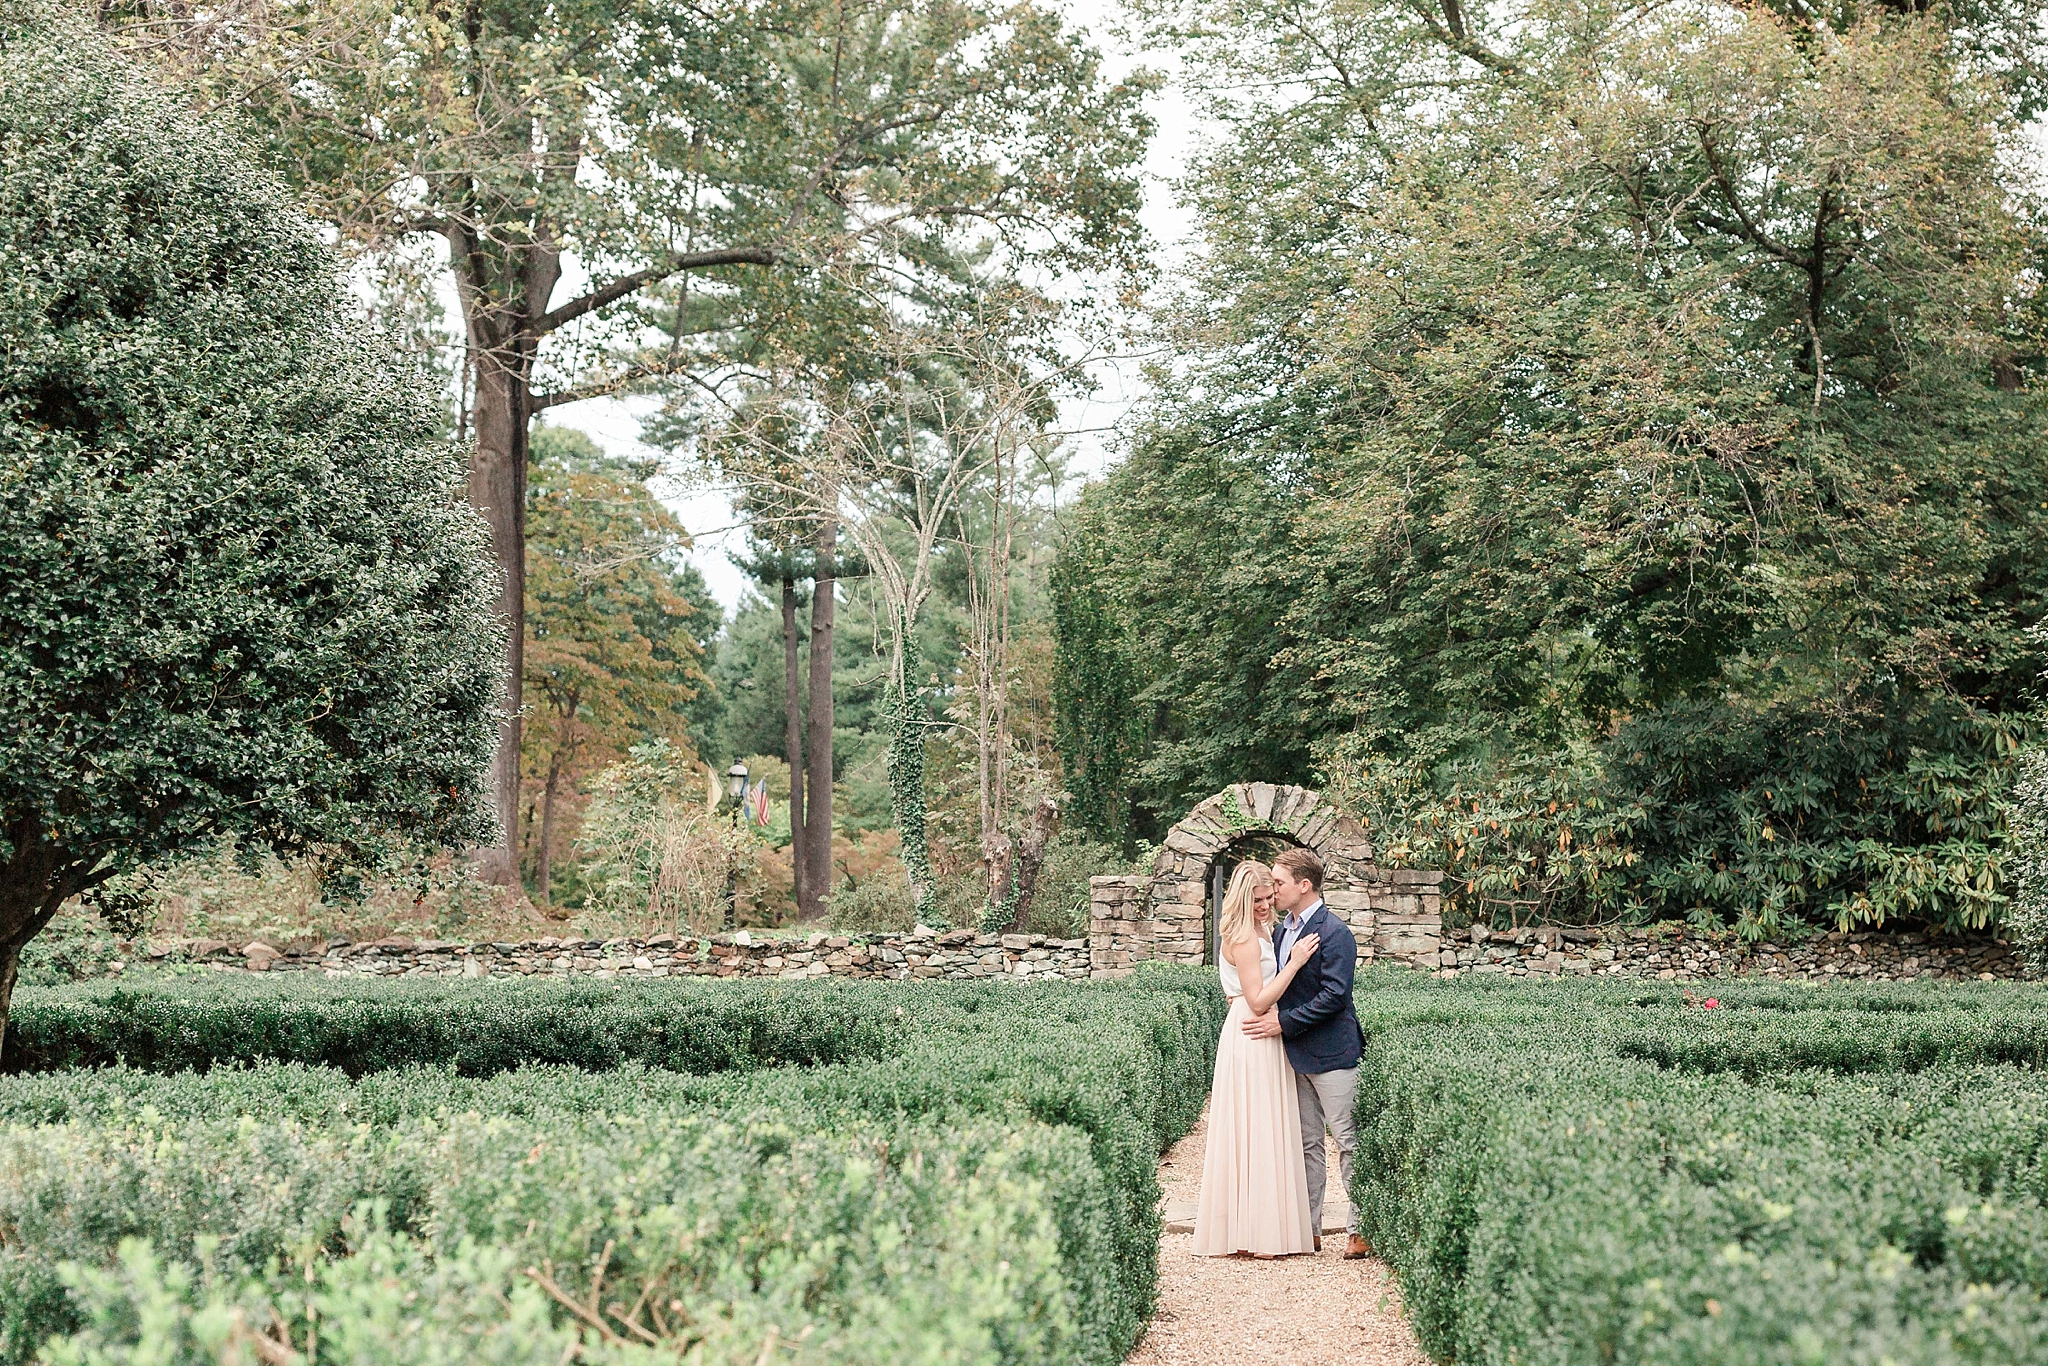 A romantic fall engagement session in the gardens of Airlie Center in Warrenton, VA.